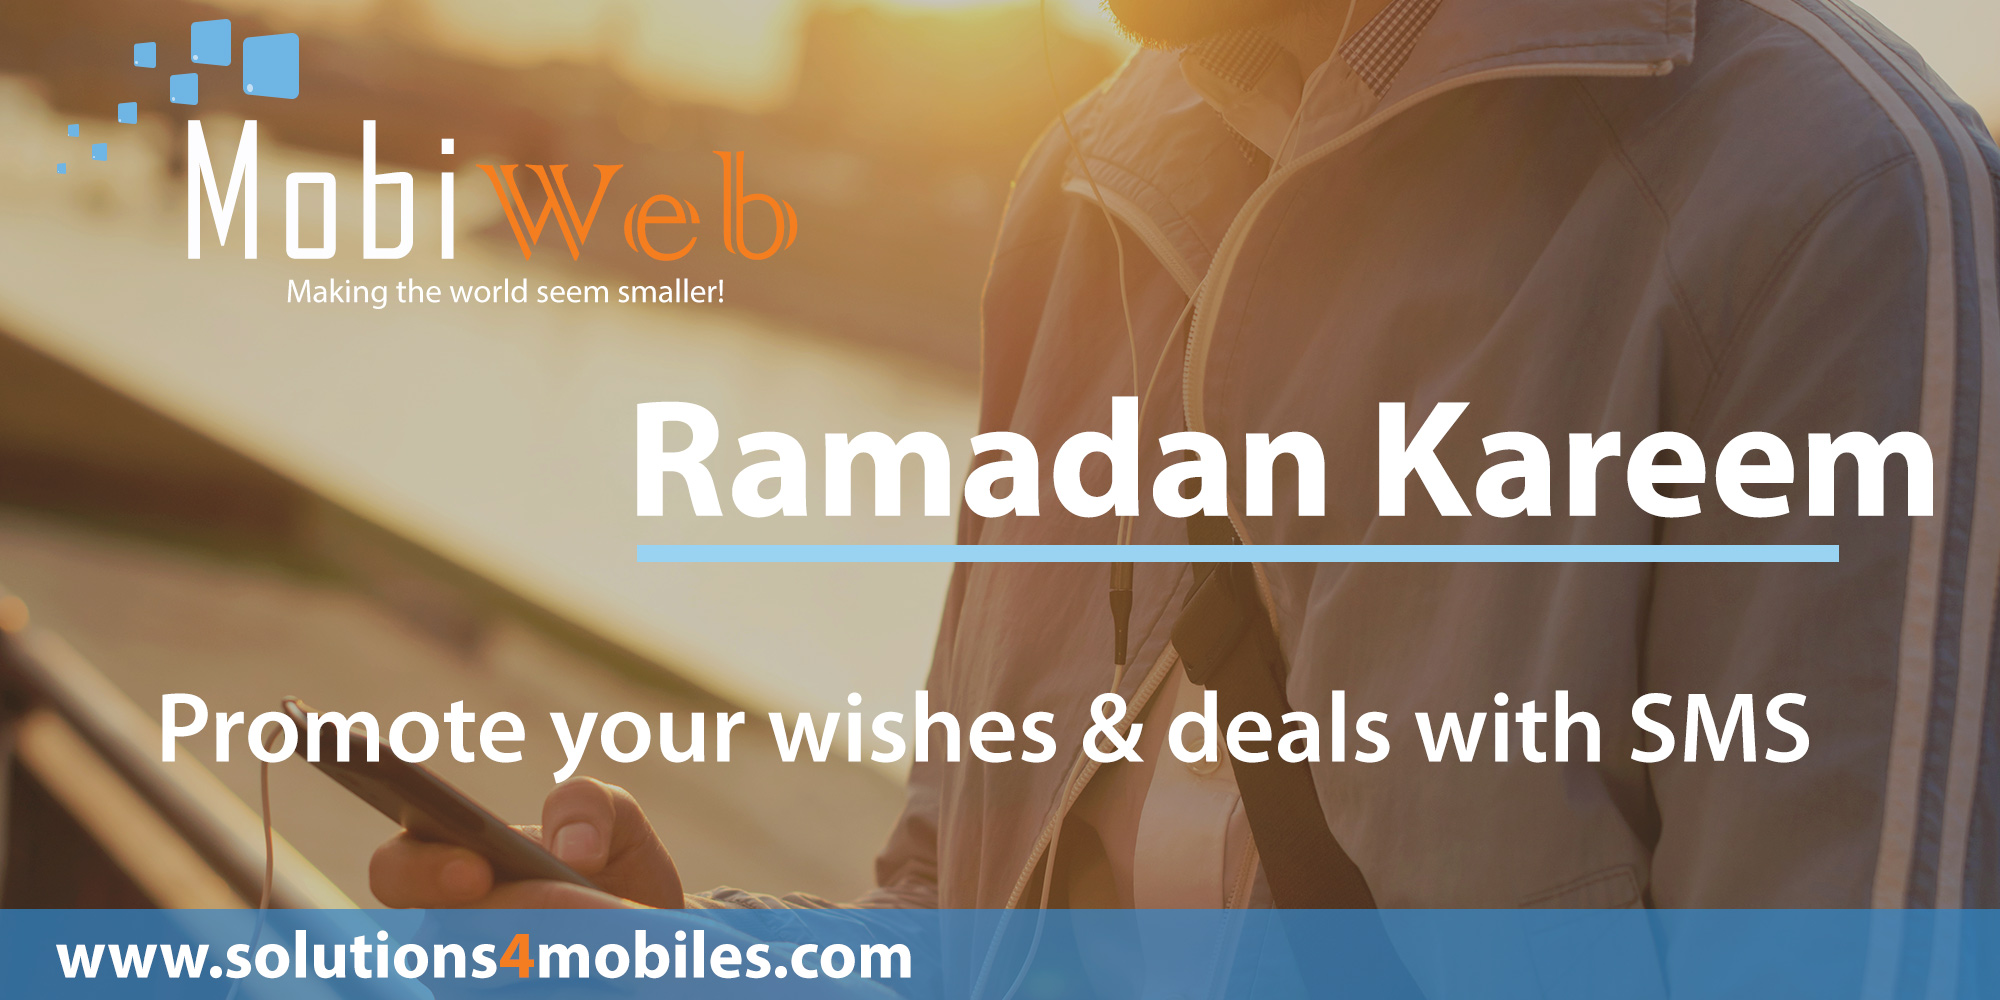 MobiWeb's special SMS offer for Ramadan 2016